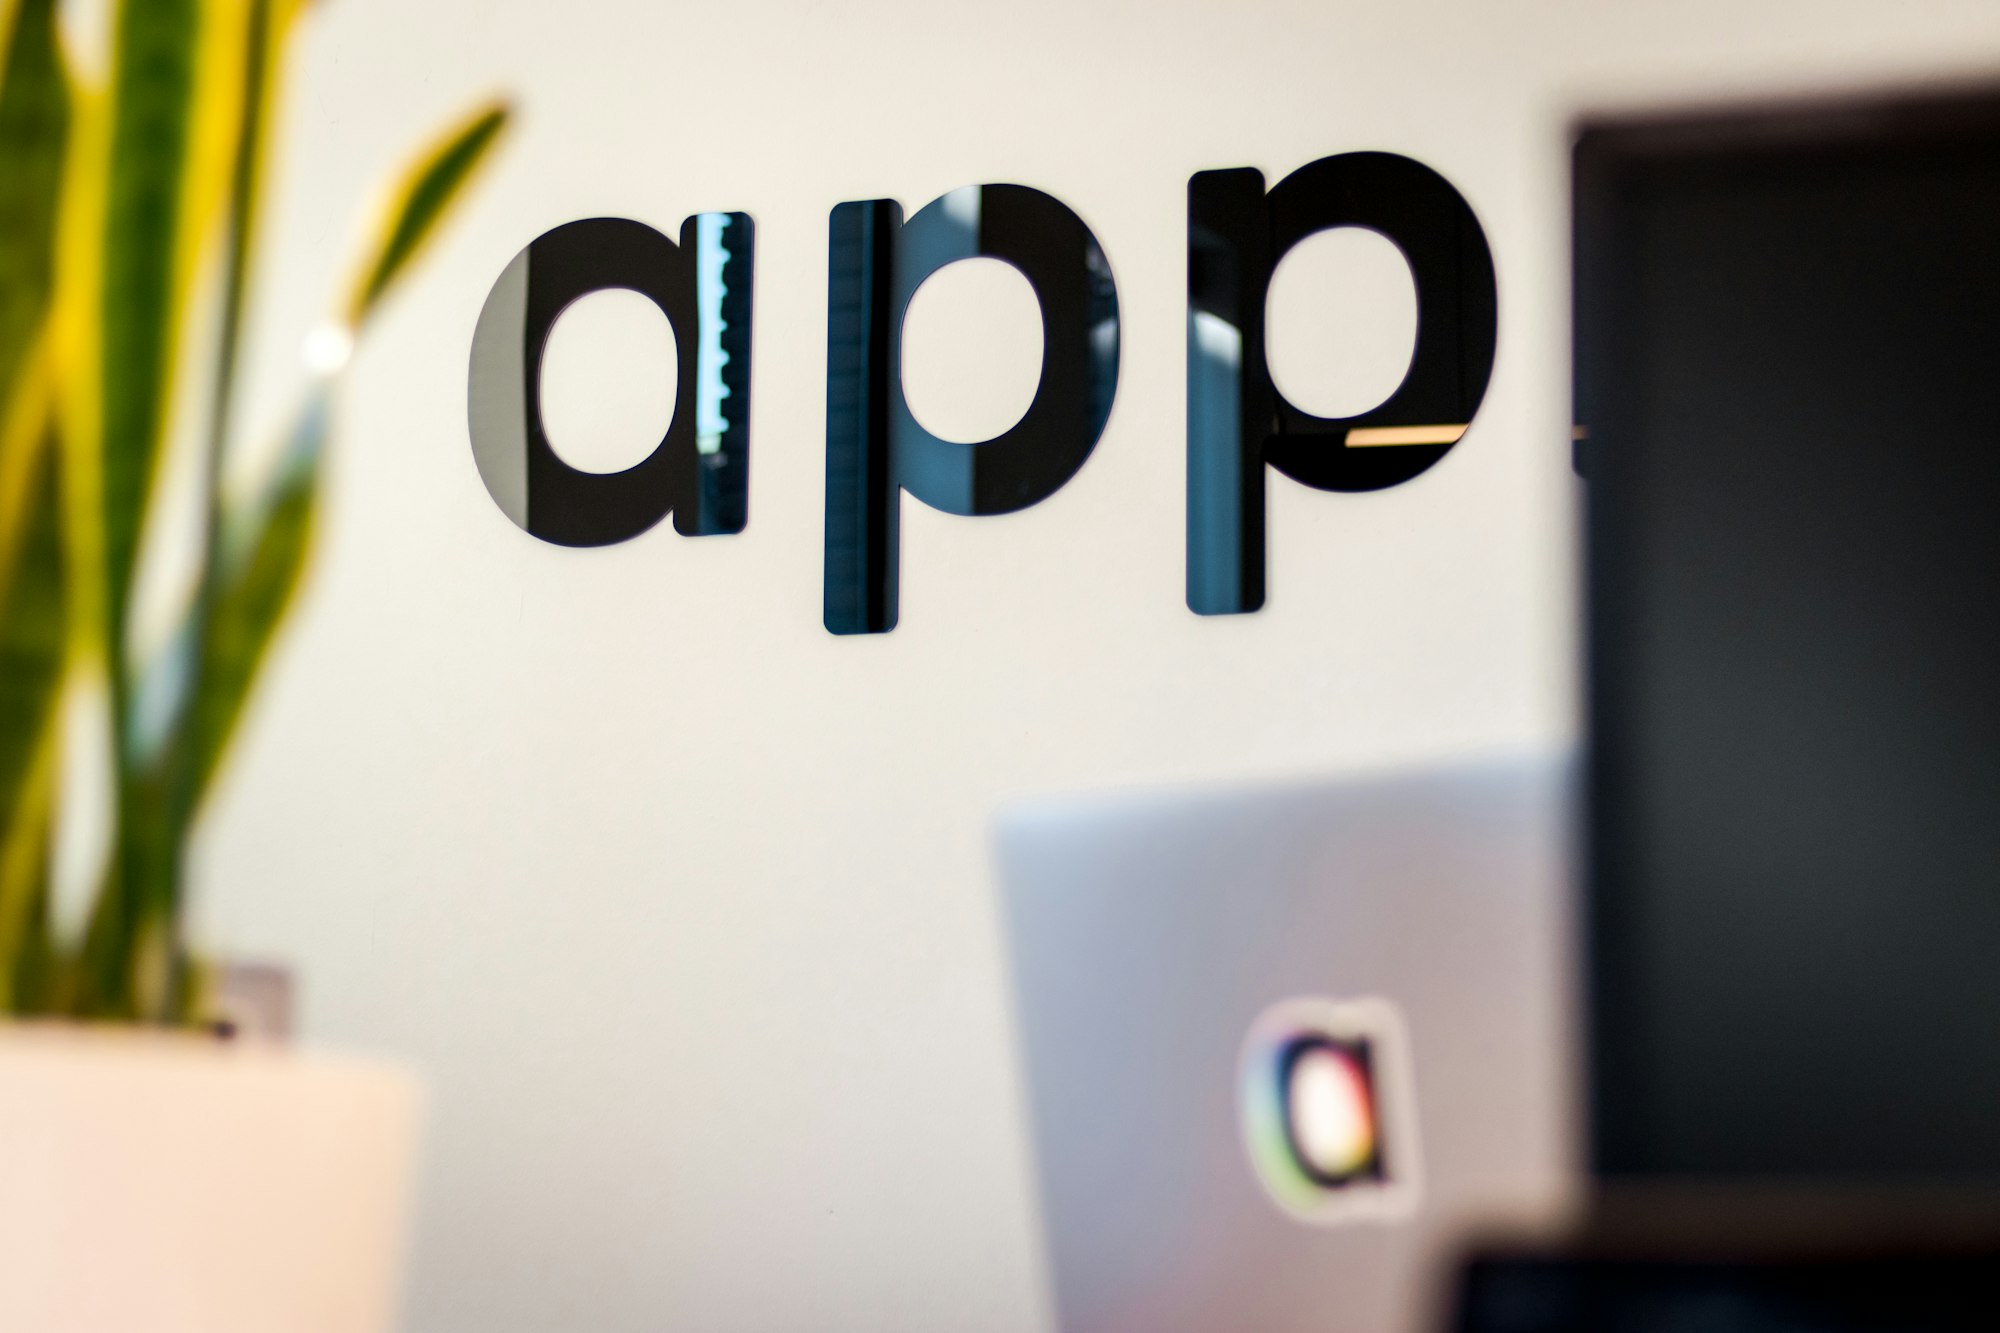 Do you want to develop an app? Don't forget to take this into account.